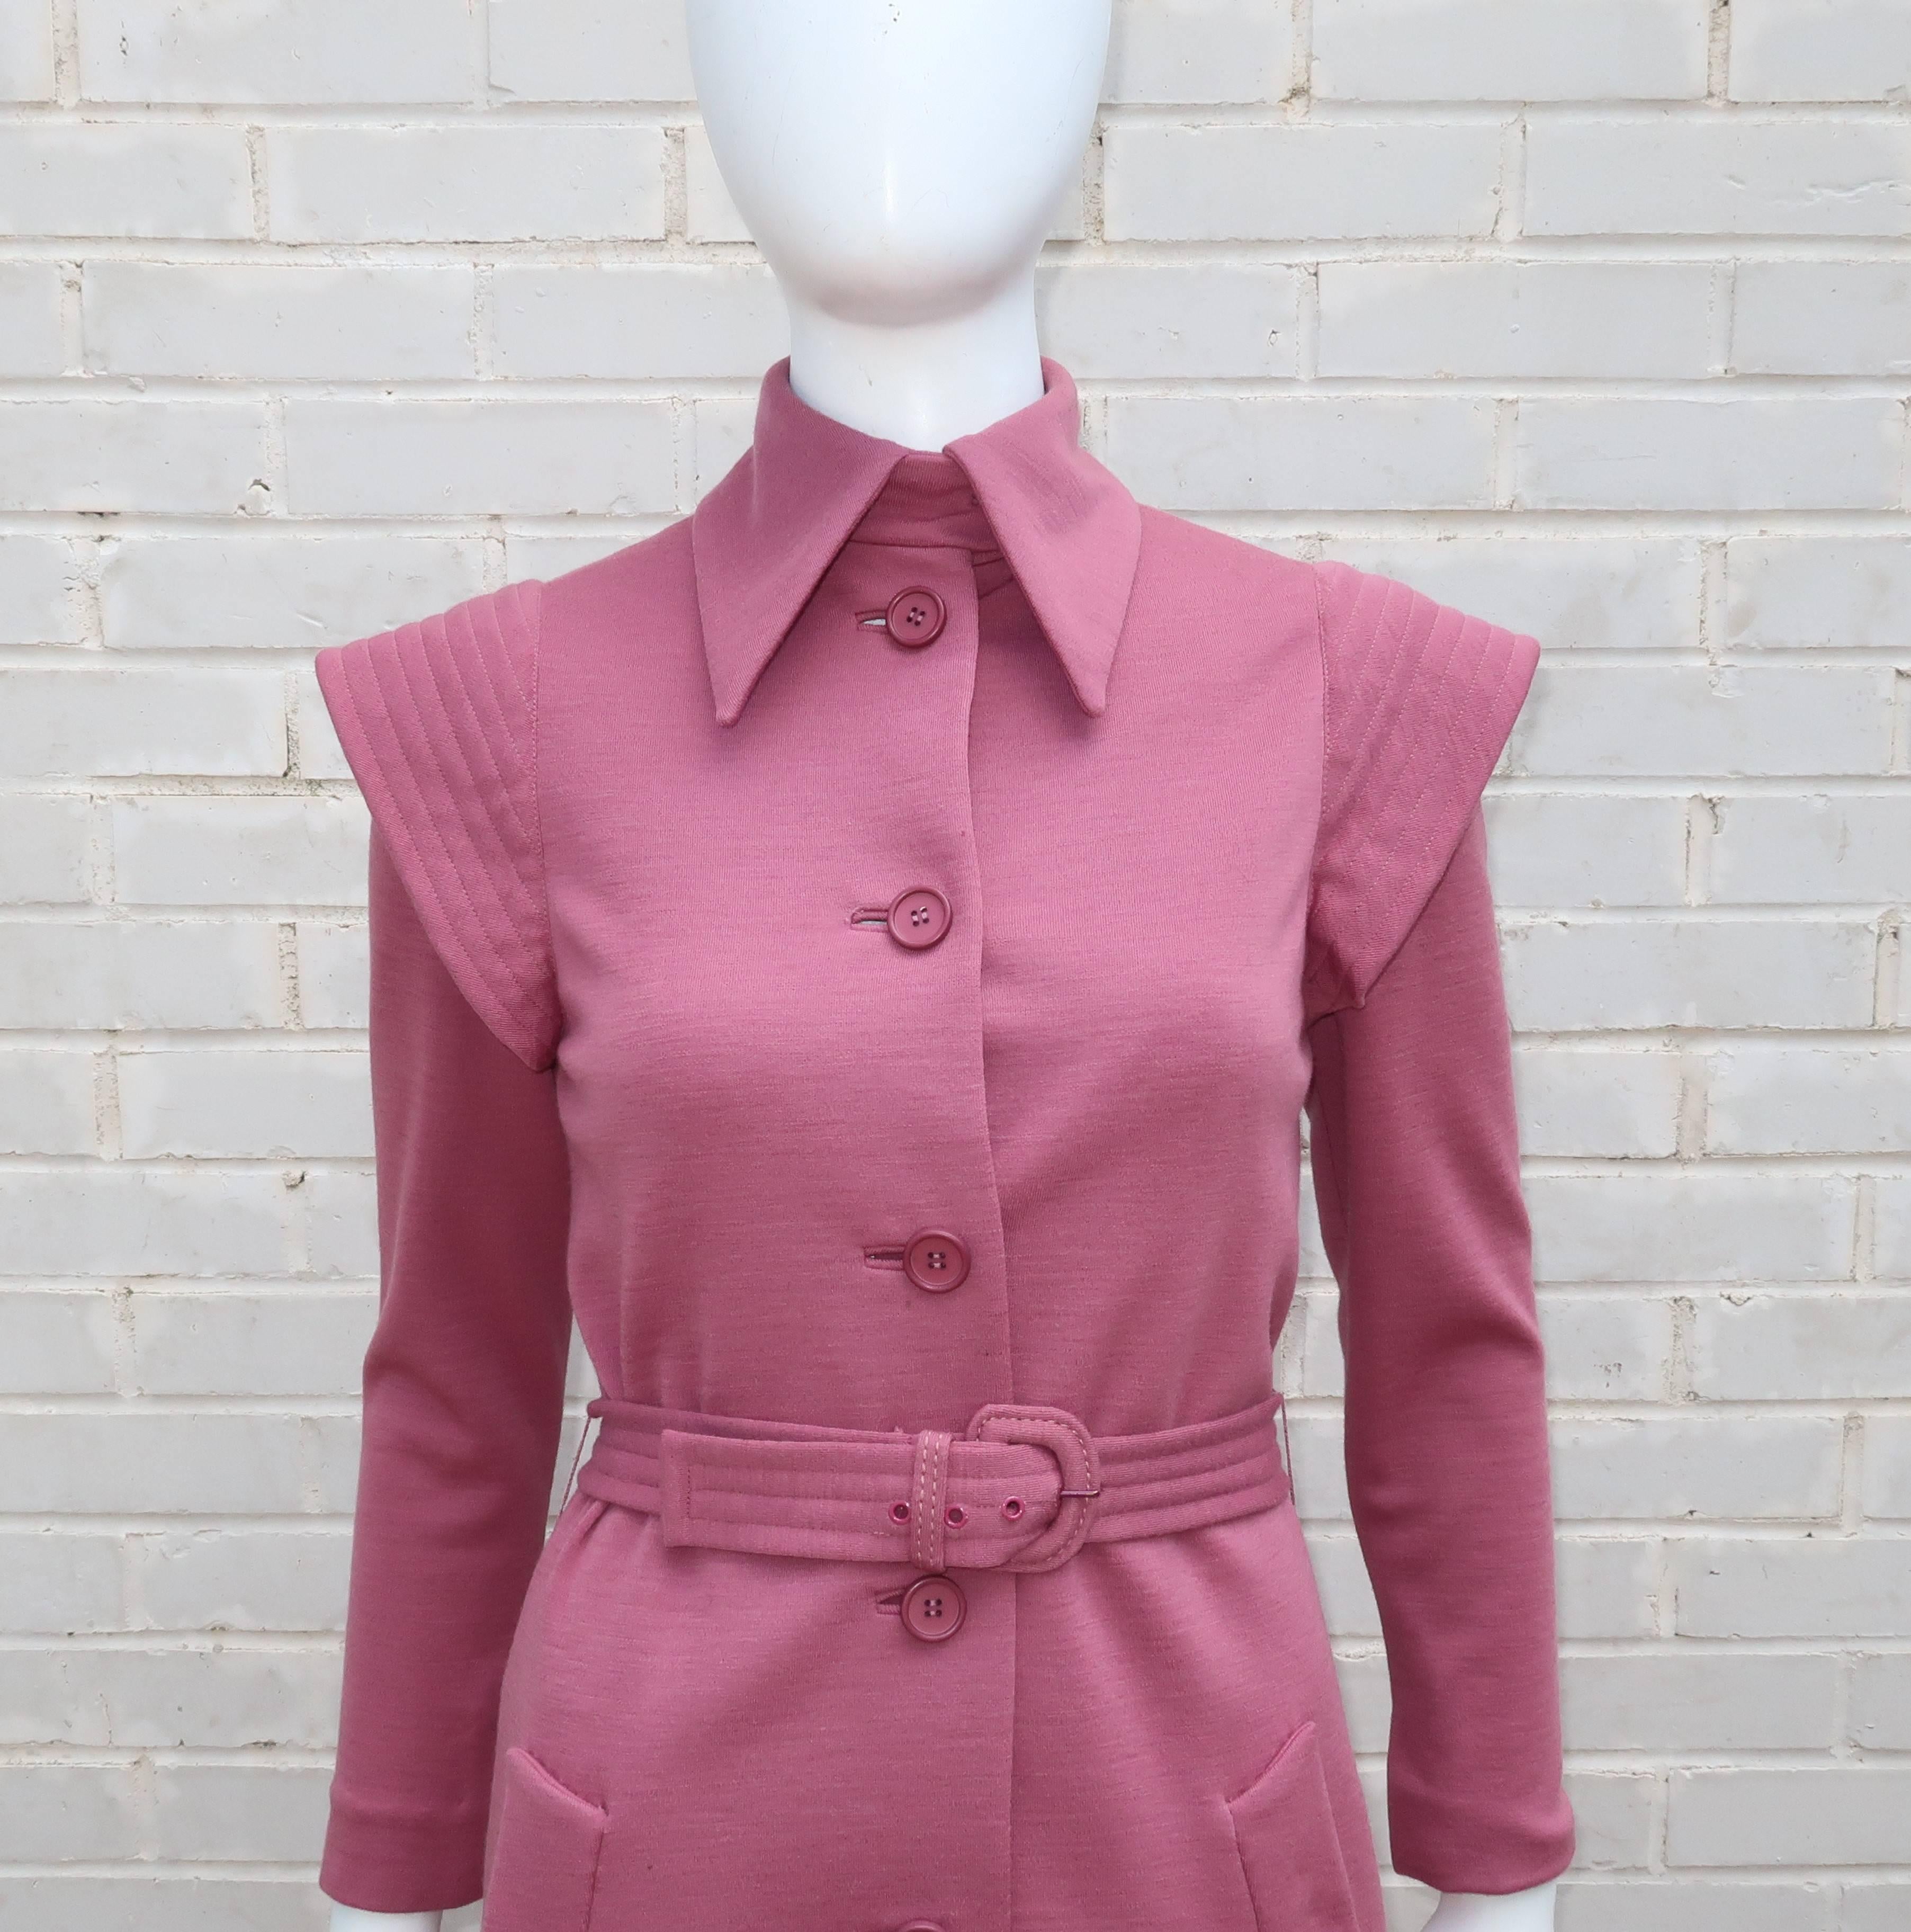 There is something decidedly futuristic about Geoffrey Beene's 1960s take on the classic coat dress.  It all begins with a sophisticated silhouette in a mauve wool knit fabric ... then add winged epaulets at the top of the sleeve and an exaggerated